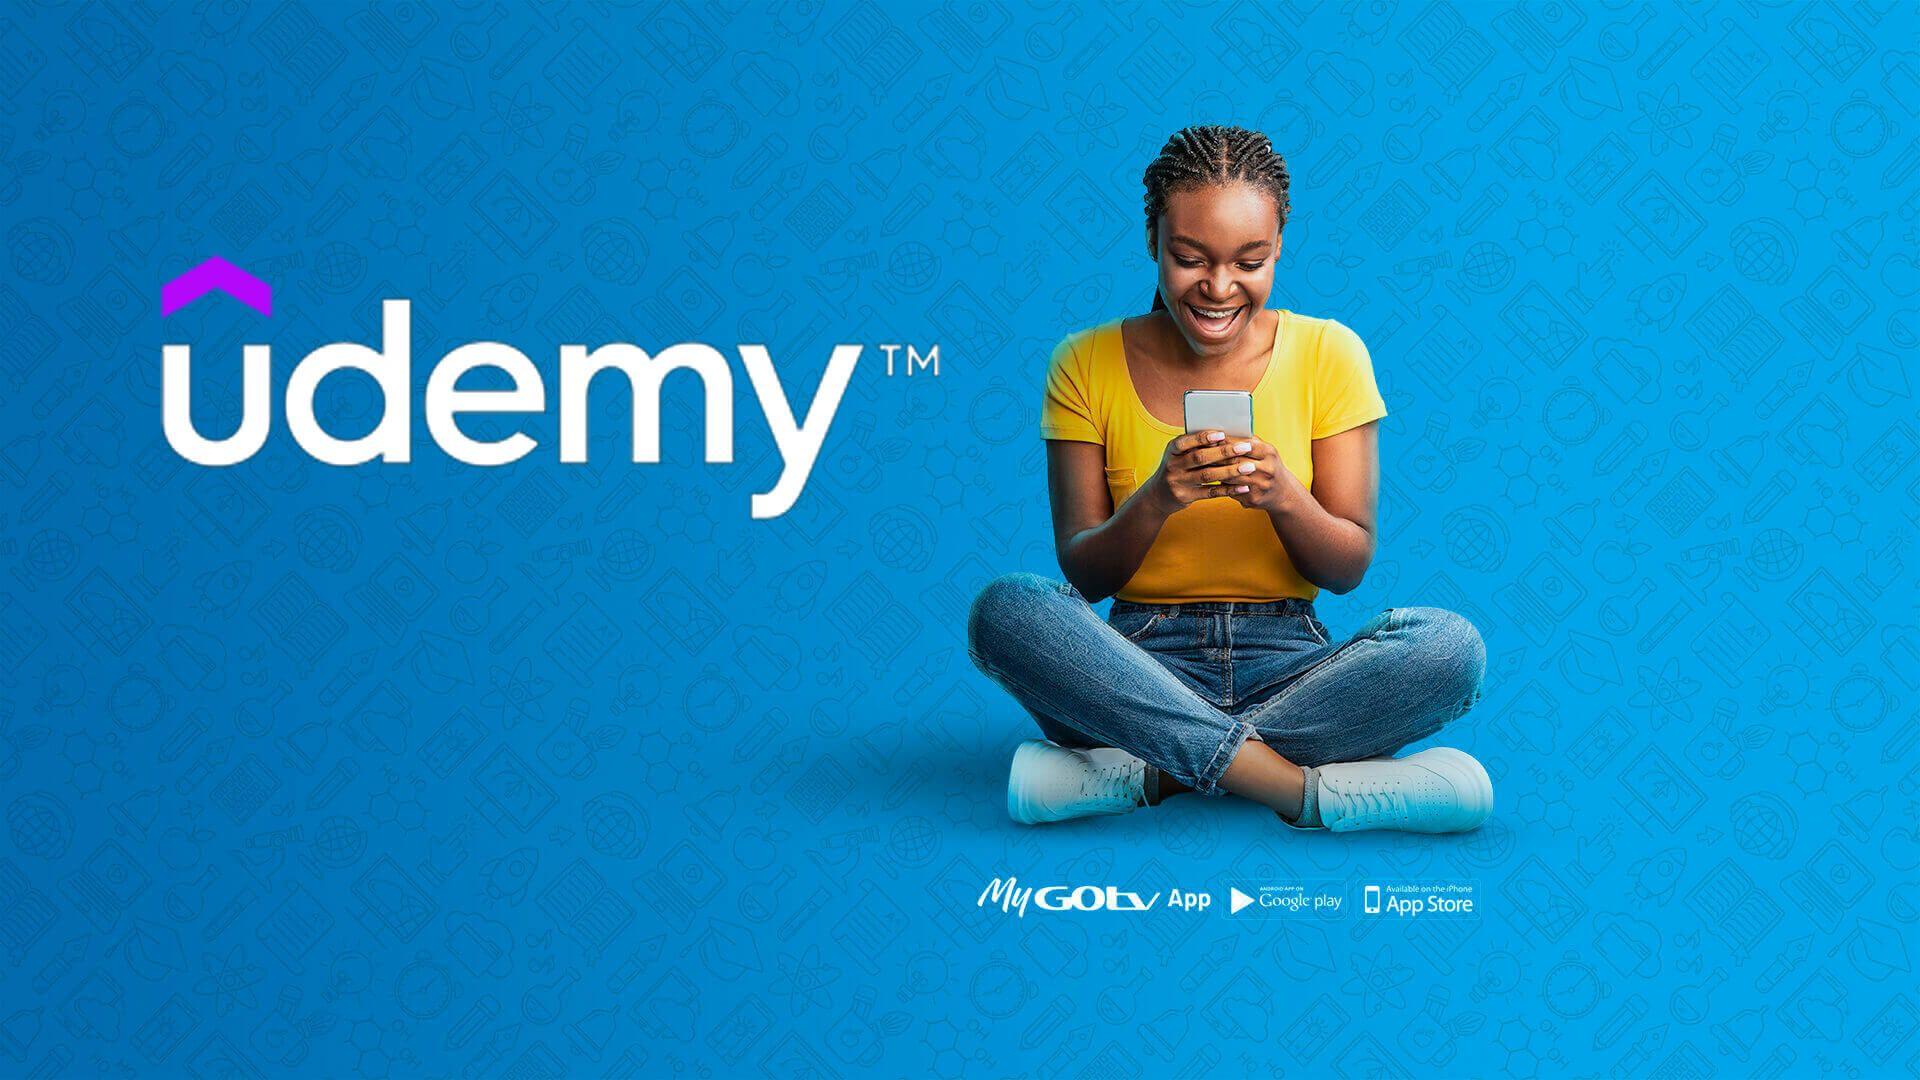 Udemy, a leading destination for learning and teaching online, is partnering with MultiChoice